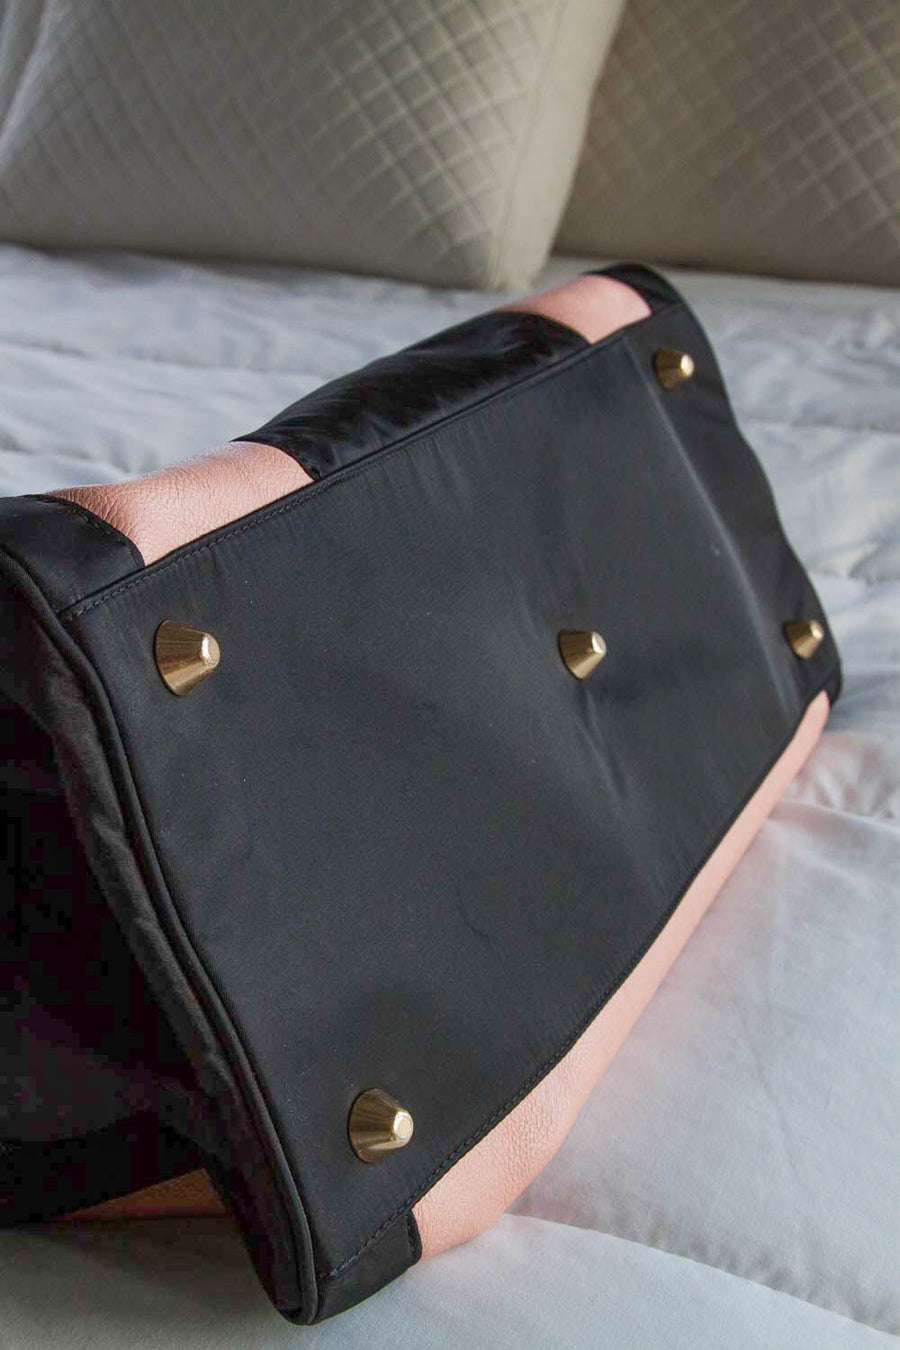 THE JESSICA BAG | BLUSH PINK - PERSU COLLECTION 